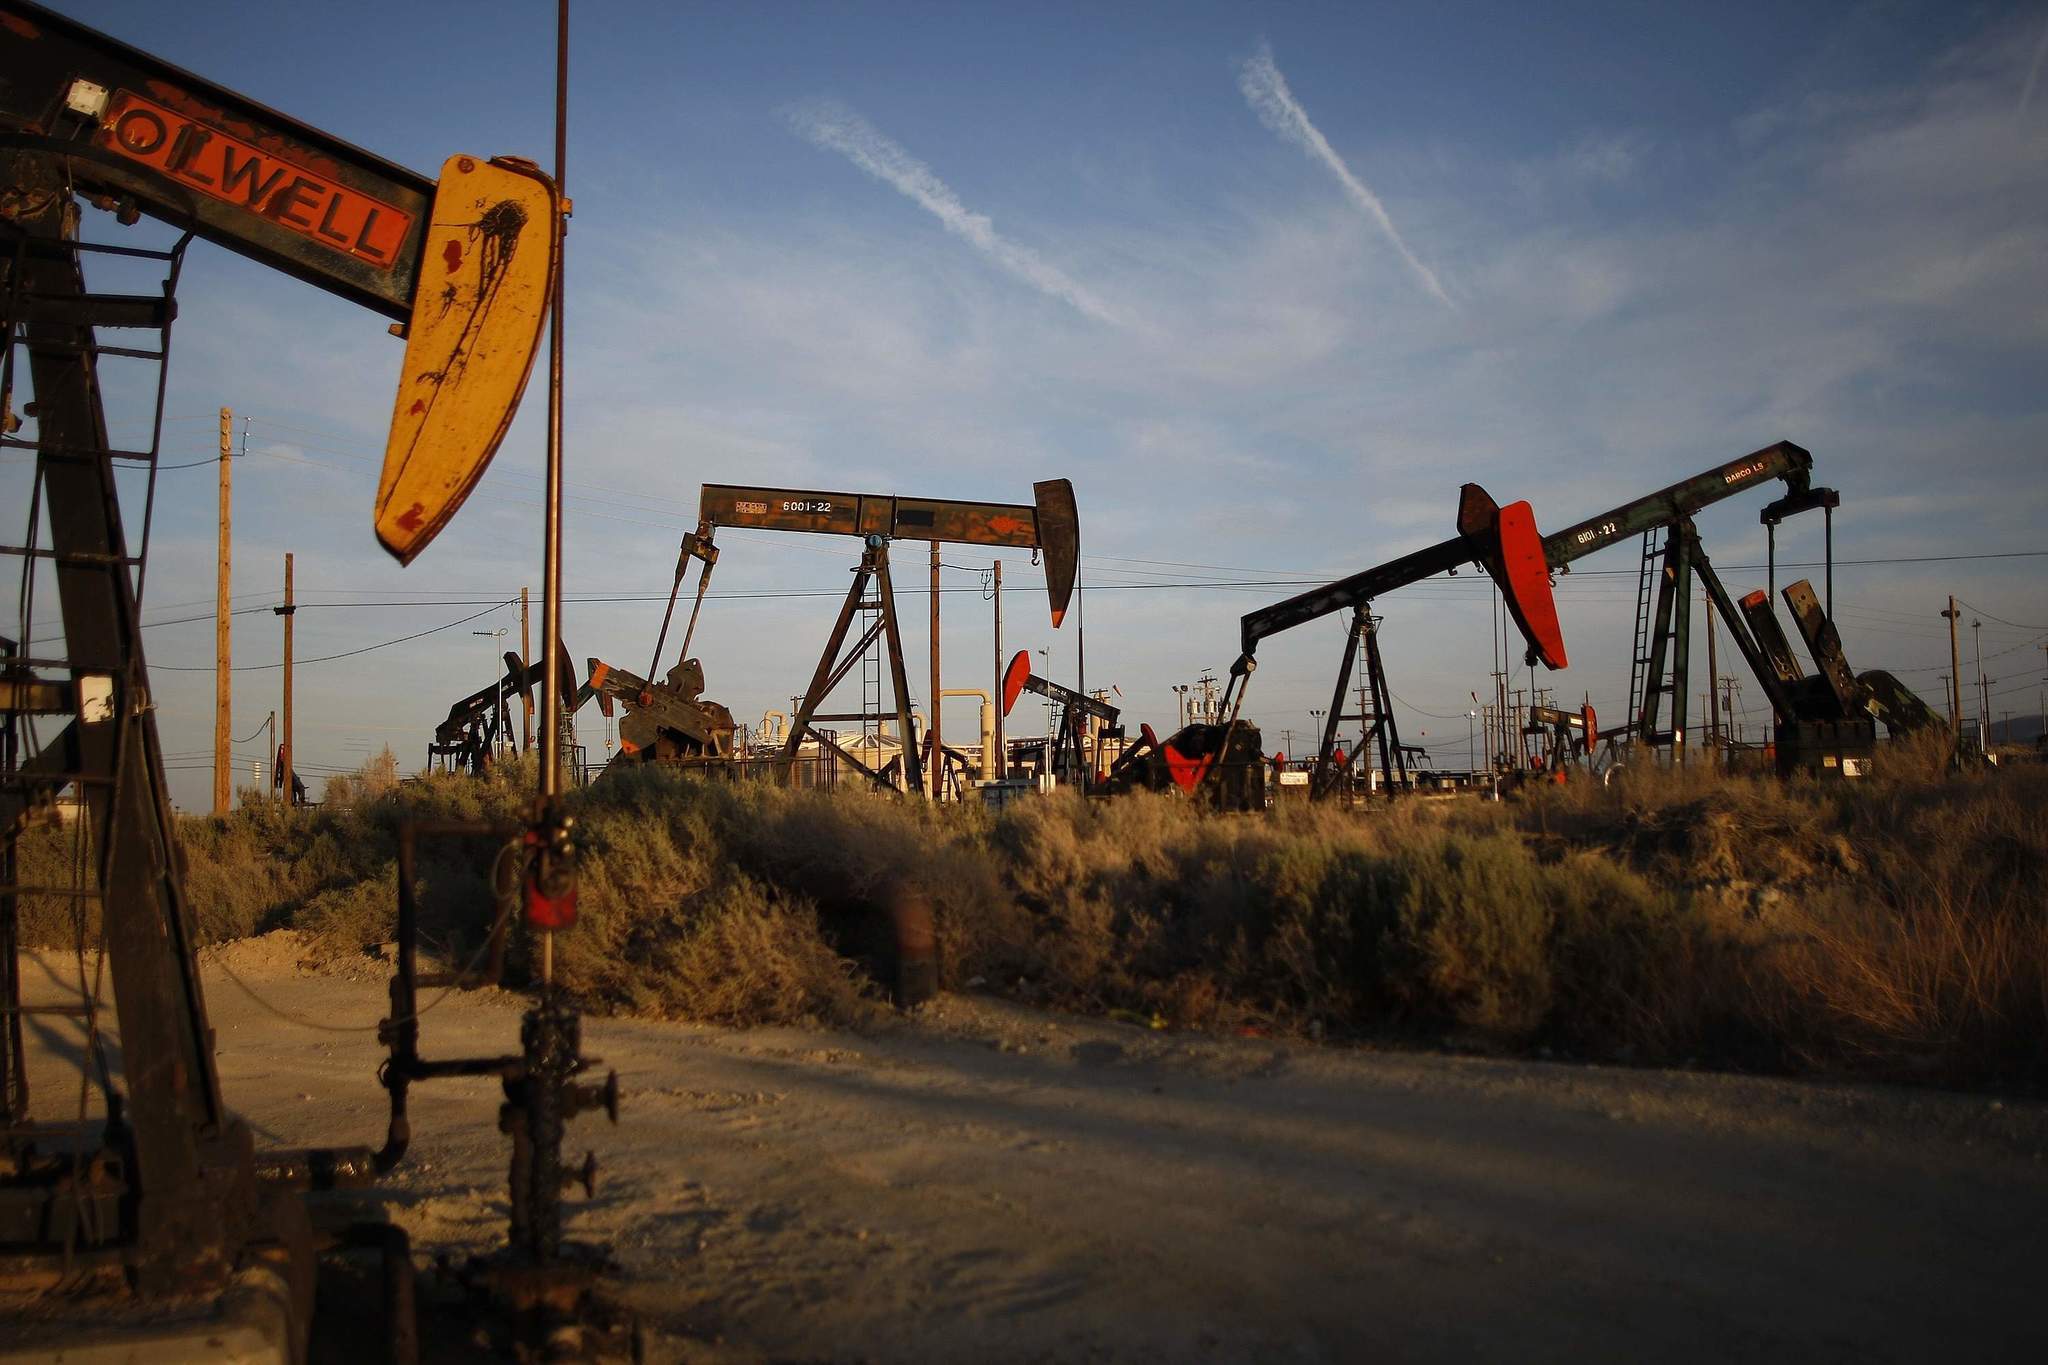 Welcome news on proposed fracking ban | Editorial - Sun Sentinel